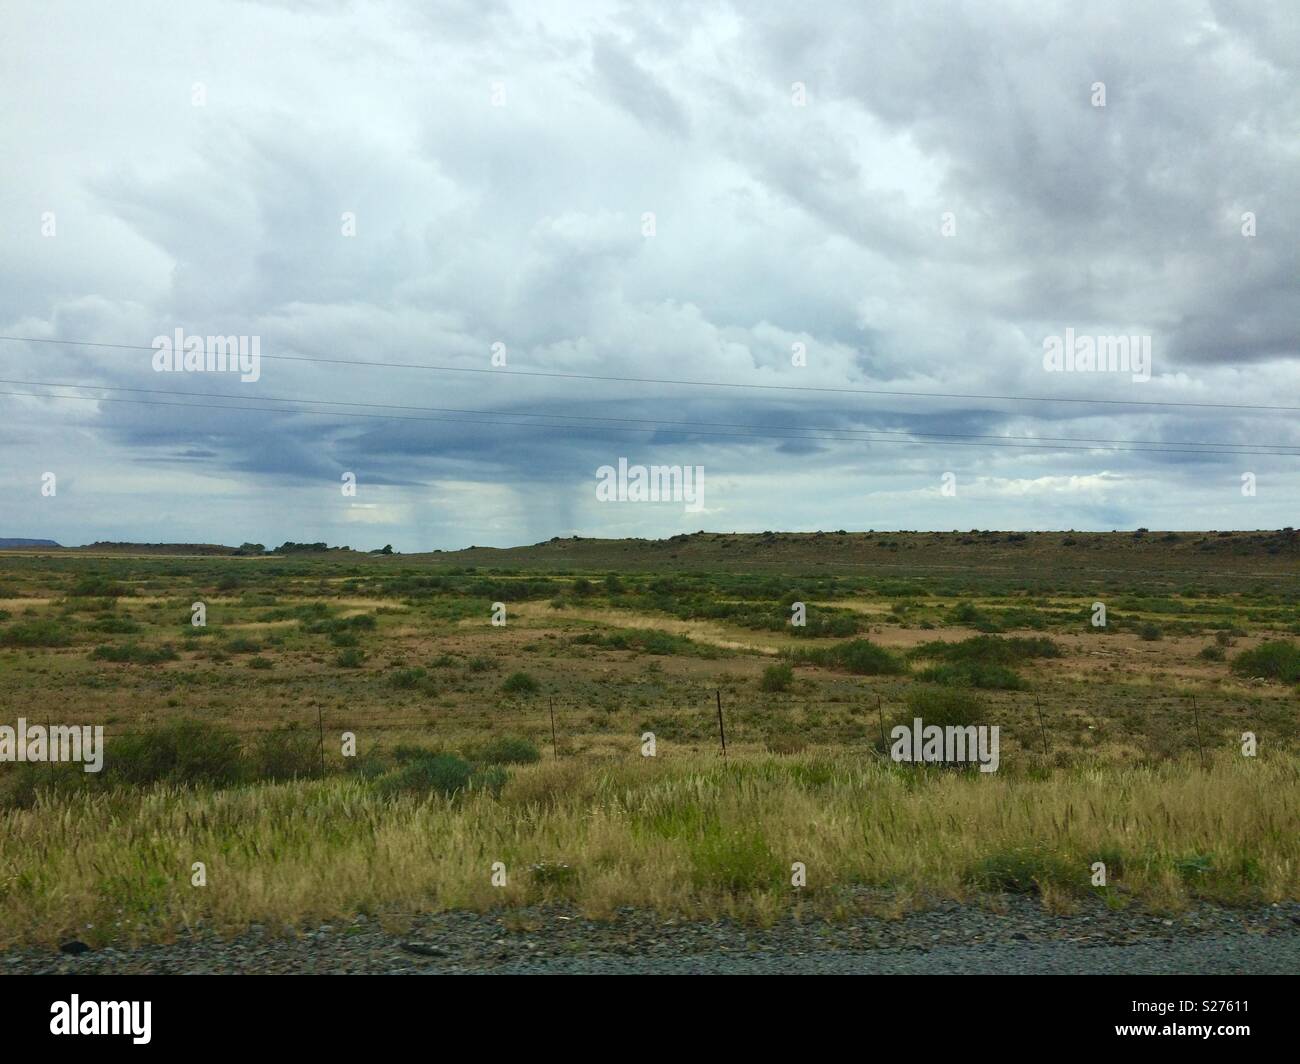 Landscape view onto semi desert vegetation in Karoo National Park, South Africa on an overcast dull Autumn day with rain clouds in the distance Stock Photo